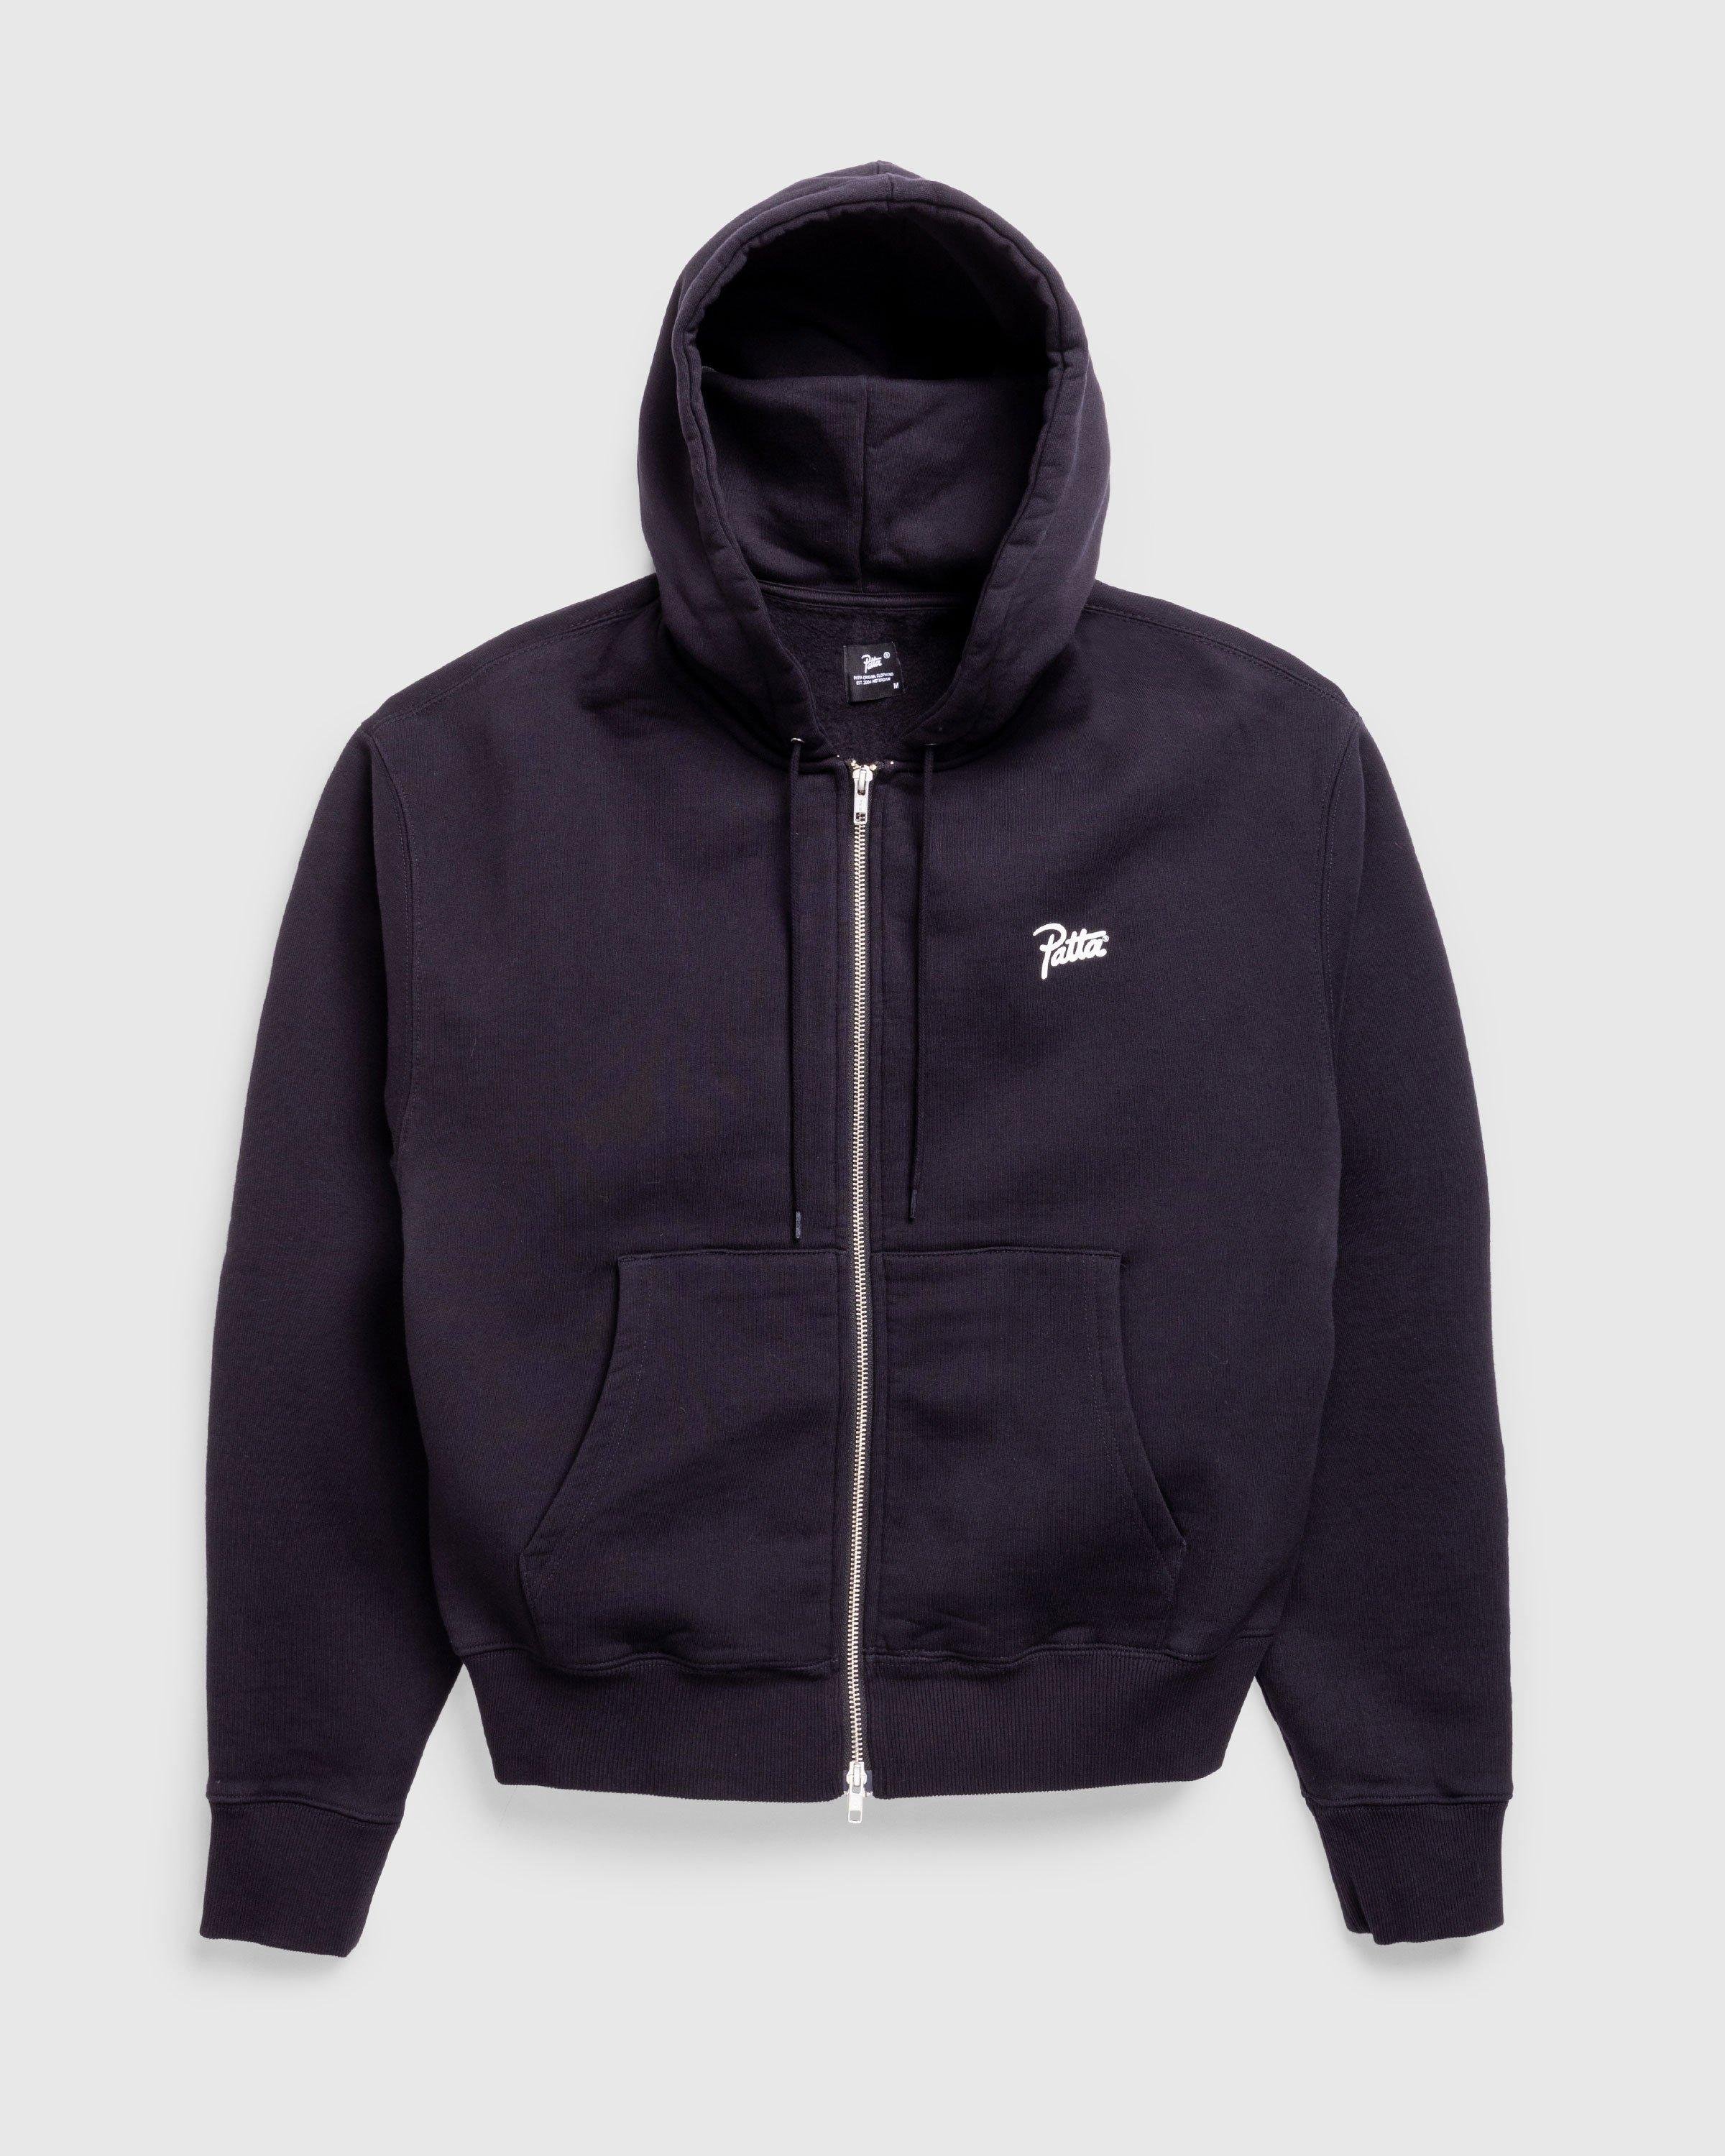 PattaClassic Zip Up Hooded Sweater Black by HIGHSNOBIETY